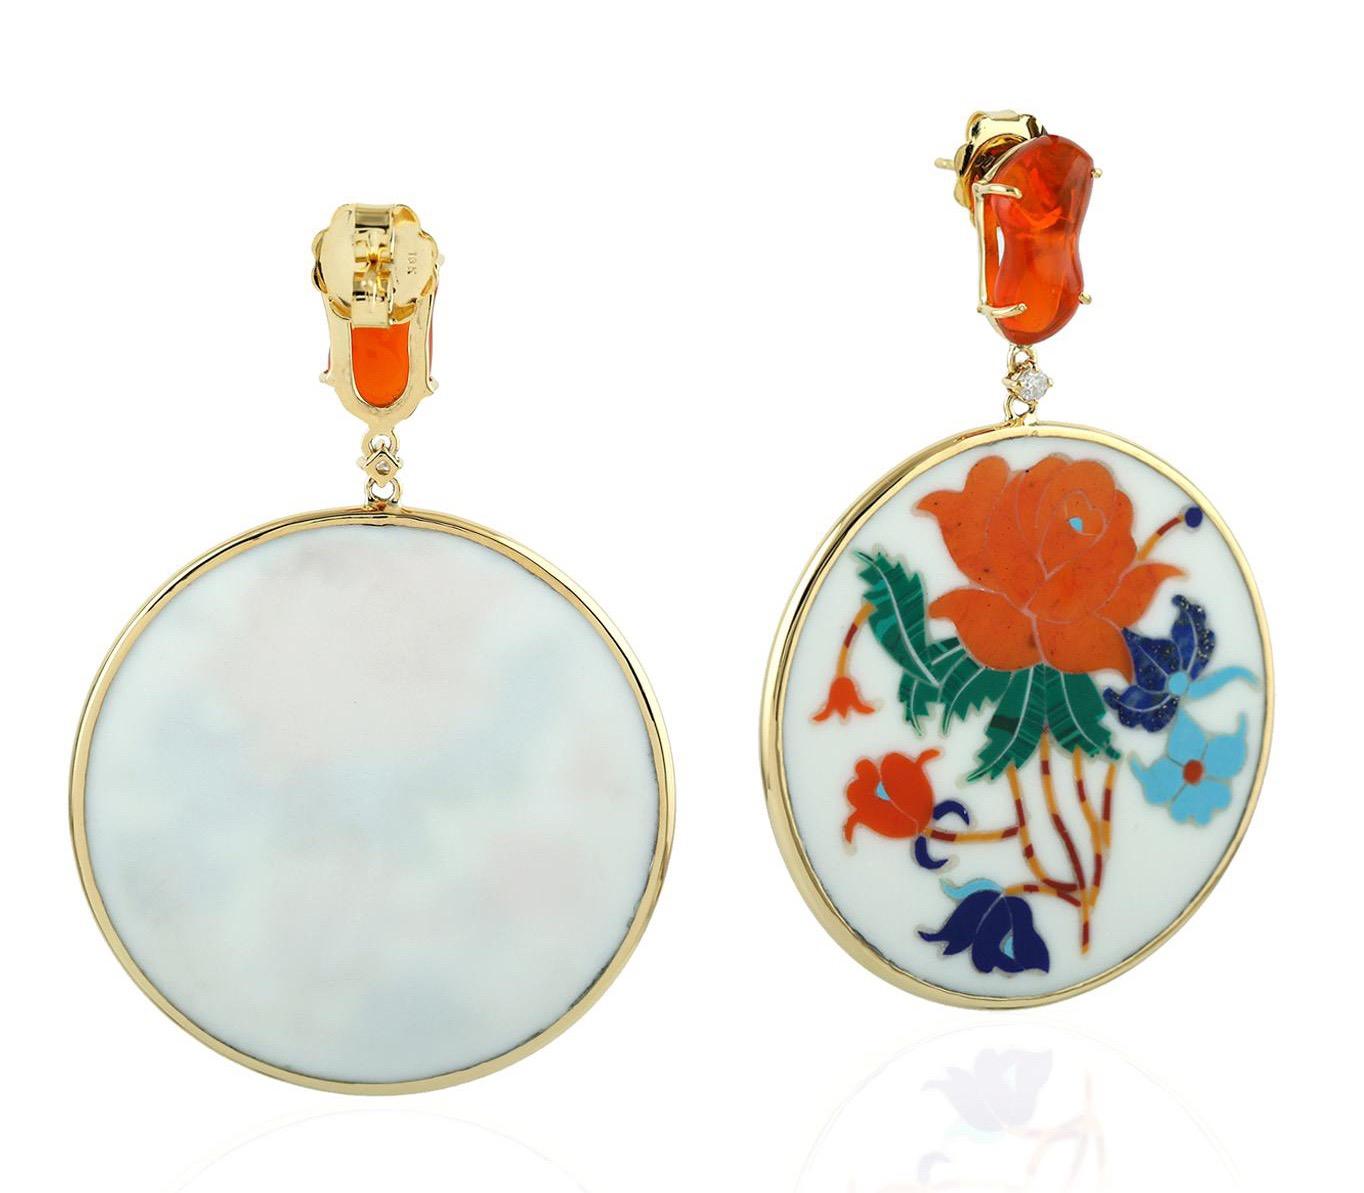 These beautiful Fire Opal Inlay earrings features unique hand painted miniature art set with 18K gold.  It is set with 6.5 carats of fire opal & 0.11 carats diamonds.

FOLLOW  MEGHNA JEWELS storefront to view the latest collection & exclusive